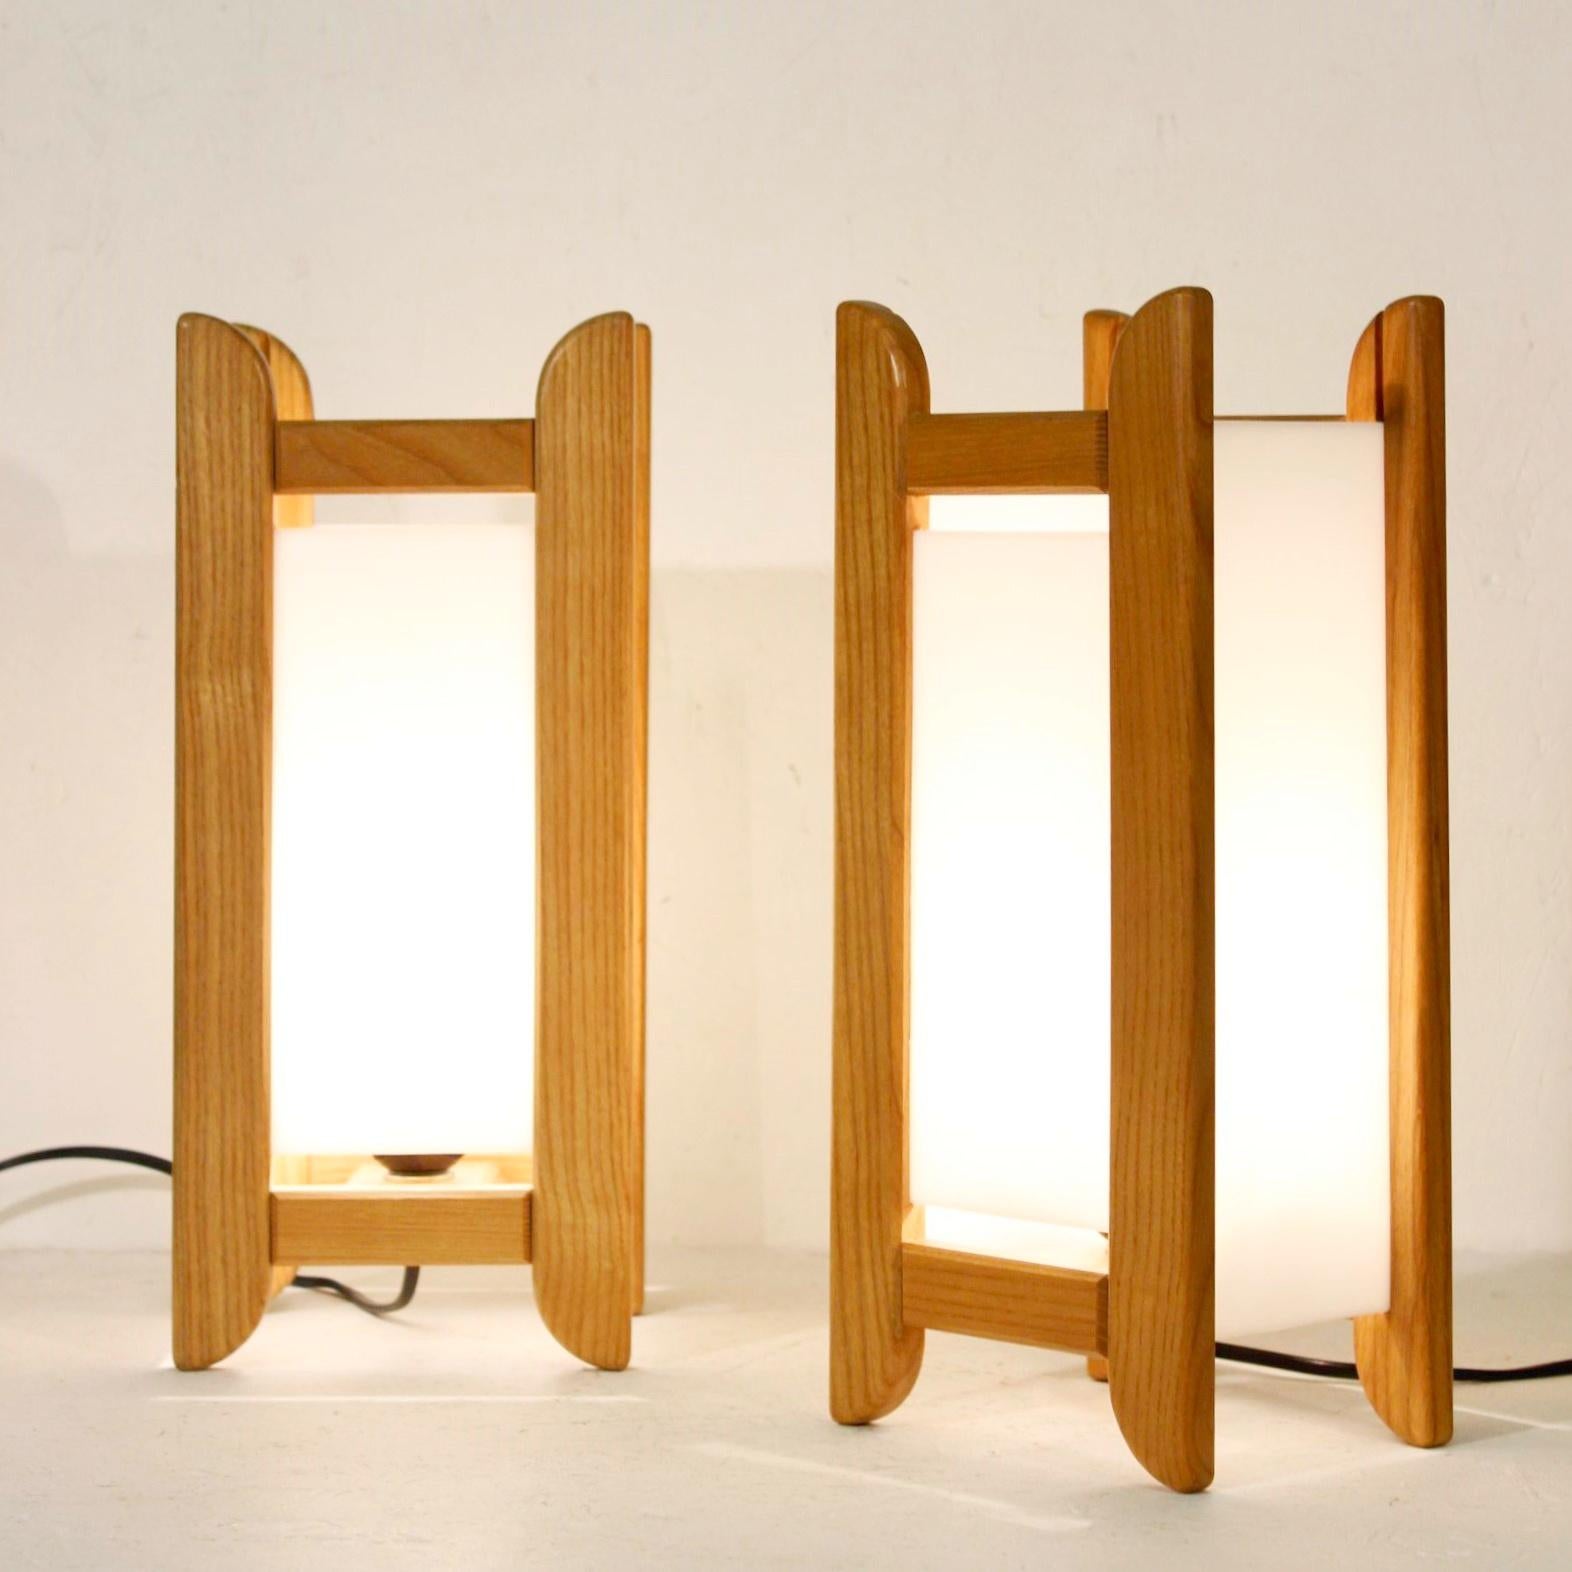 Pair of beech and white acrylic lamps circa 1980, signed by Alain Gaubert. 

Alain Gaubert was a French cabinetmaker popular for his meditation stool 